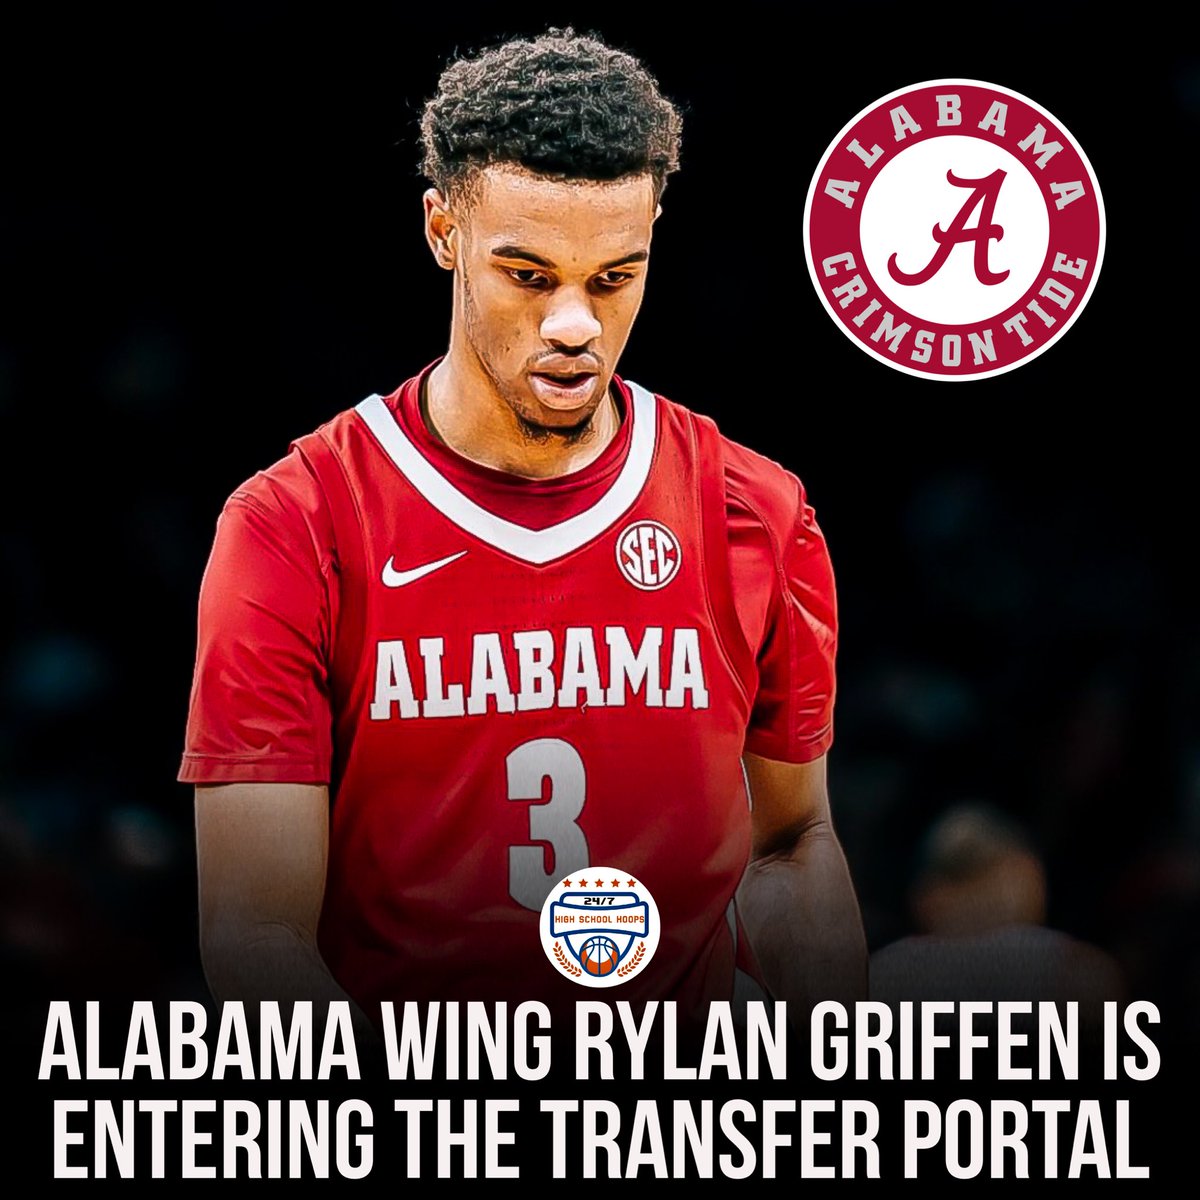 LATE NIGHT PORTAL: Alabama guard Rylan Griffen is entering the transfer portal, per source. Griffen is a native of Dallas, Texas who has spent the last two seasons at Alabama. He’s a former 4⭐️ recruit. He averaged 11.2PPG, 3.4RPG and 1.9APG this season. Shot 39.2% from 3.